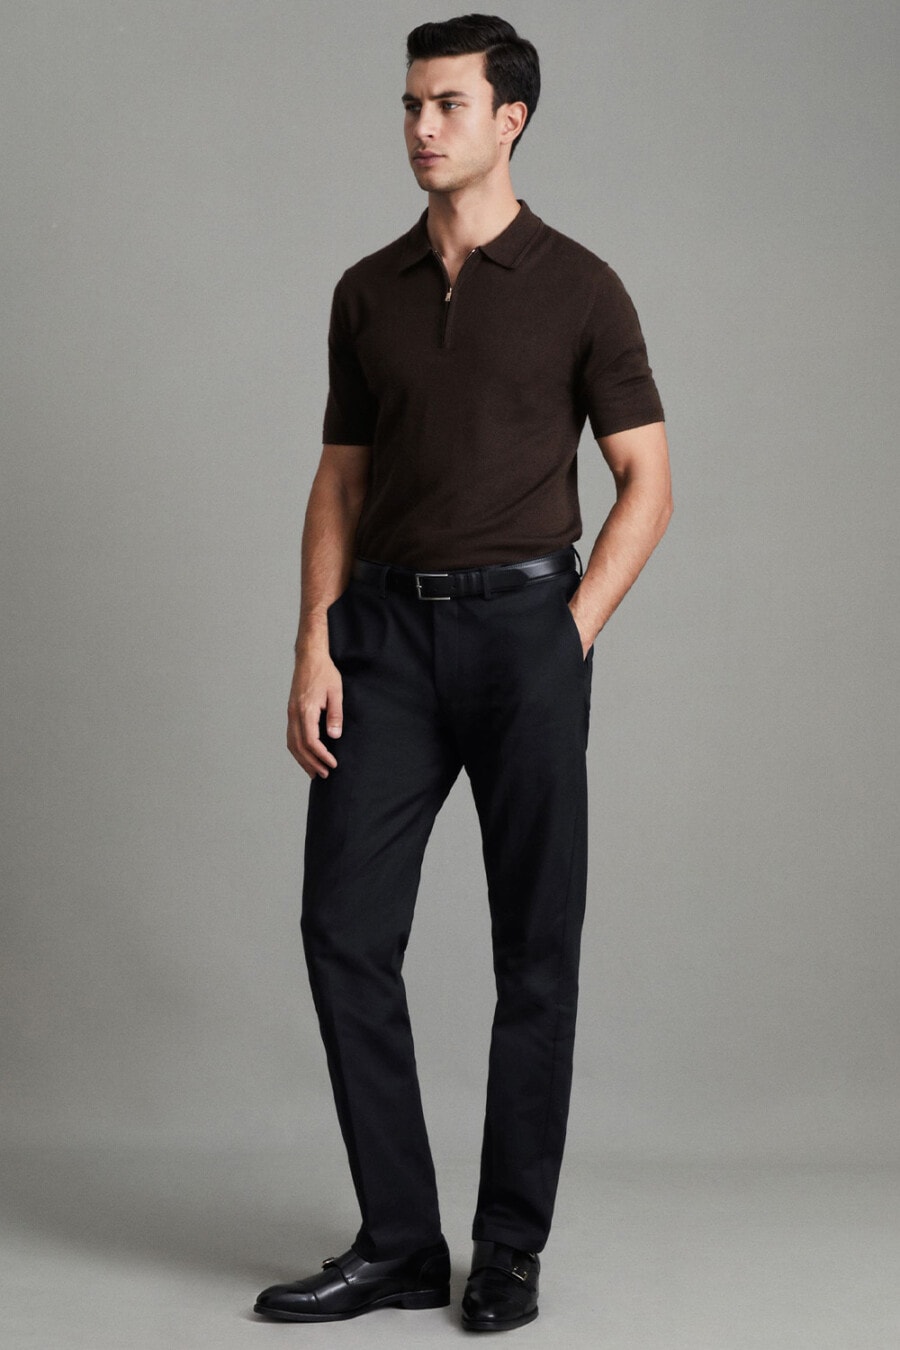 Men's black tailored pants, tucked in brown knitted polo shirt and black leather monk-strap shoes business casual outfit